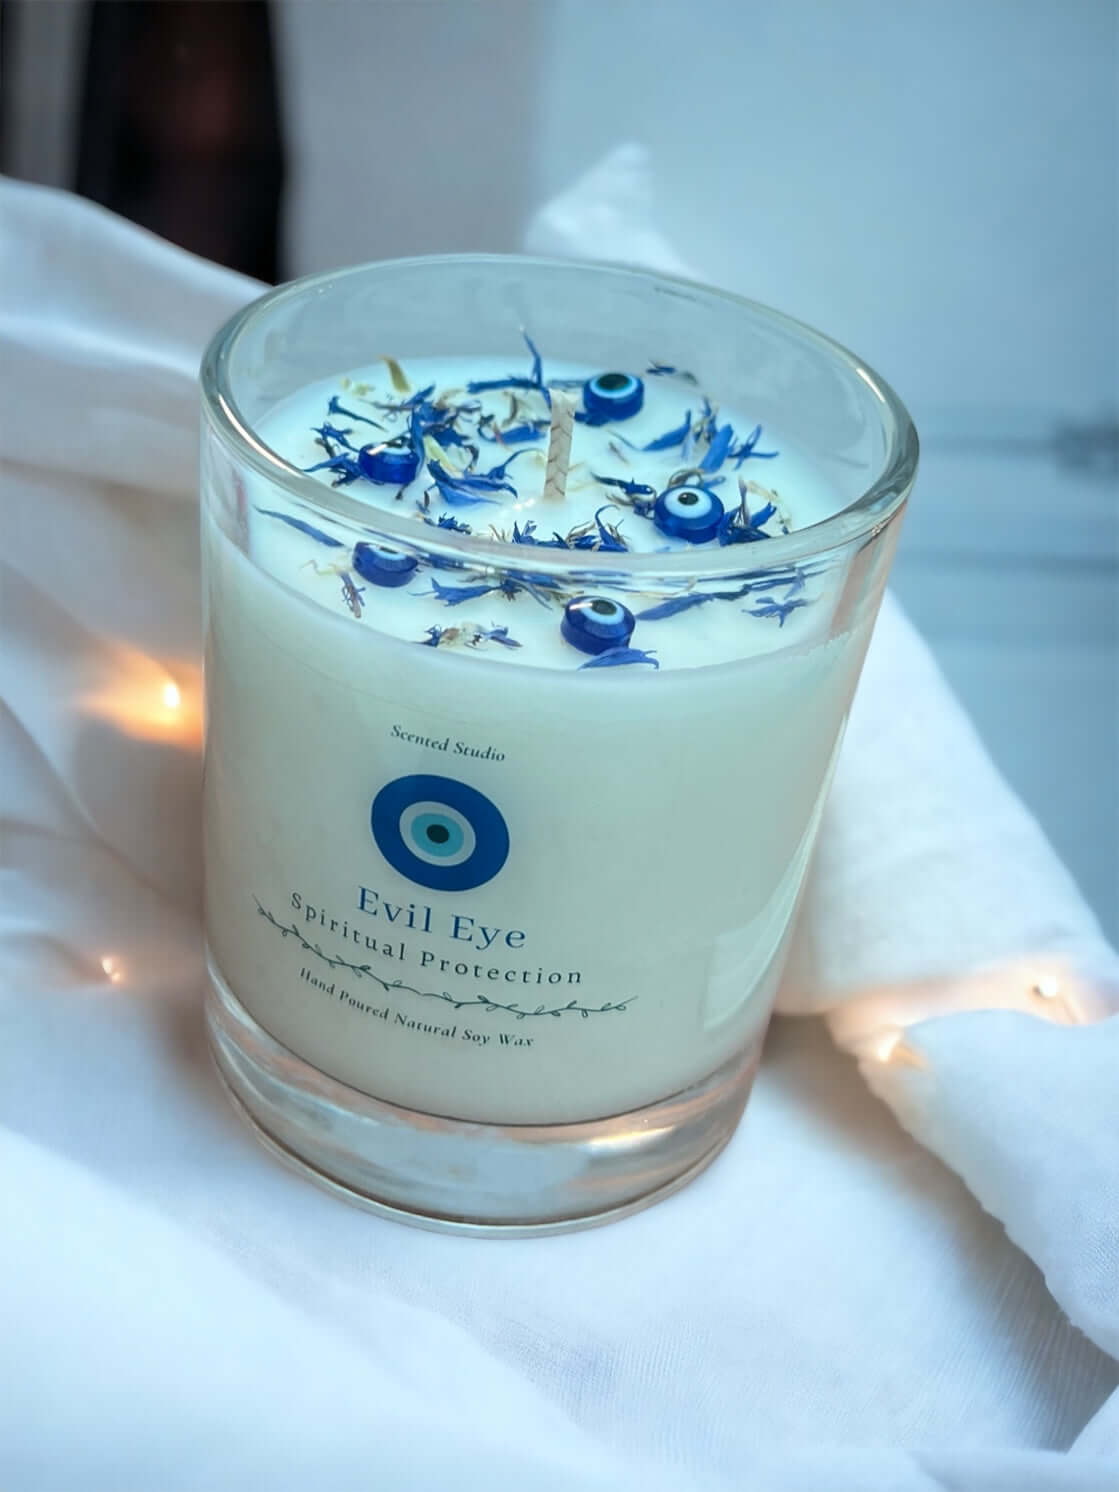 Introducing our Evil Eye Candle, crafted to bring both beauty and protection to your space.